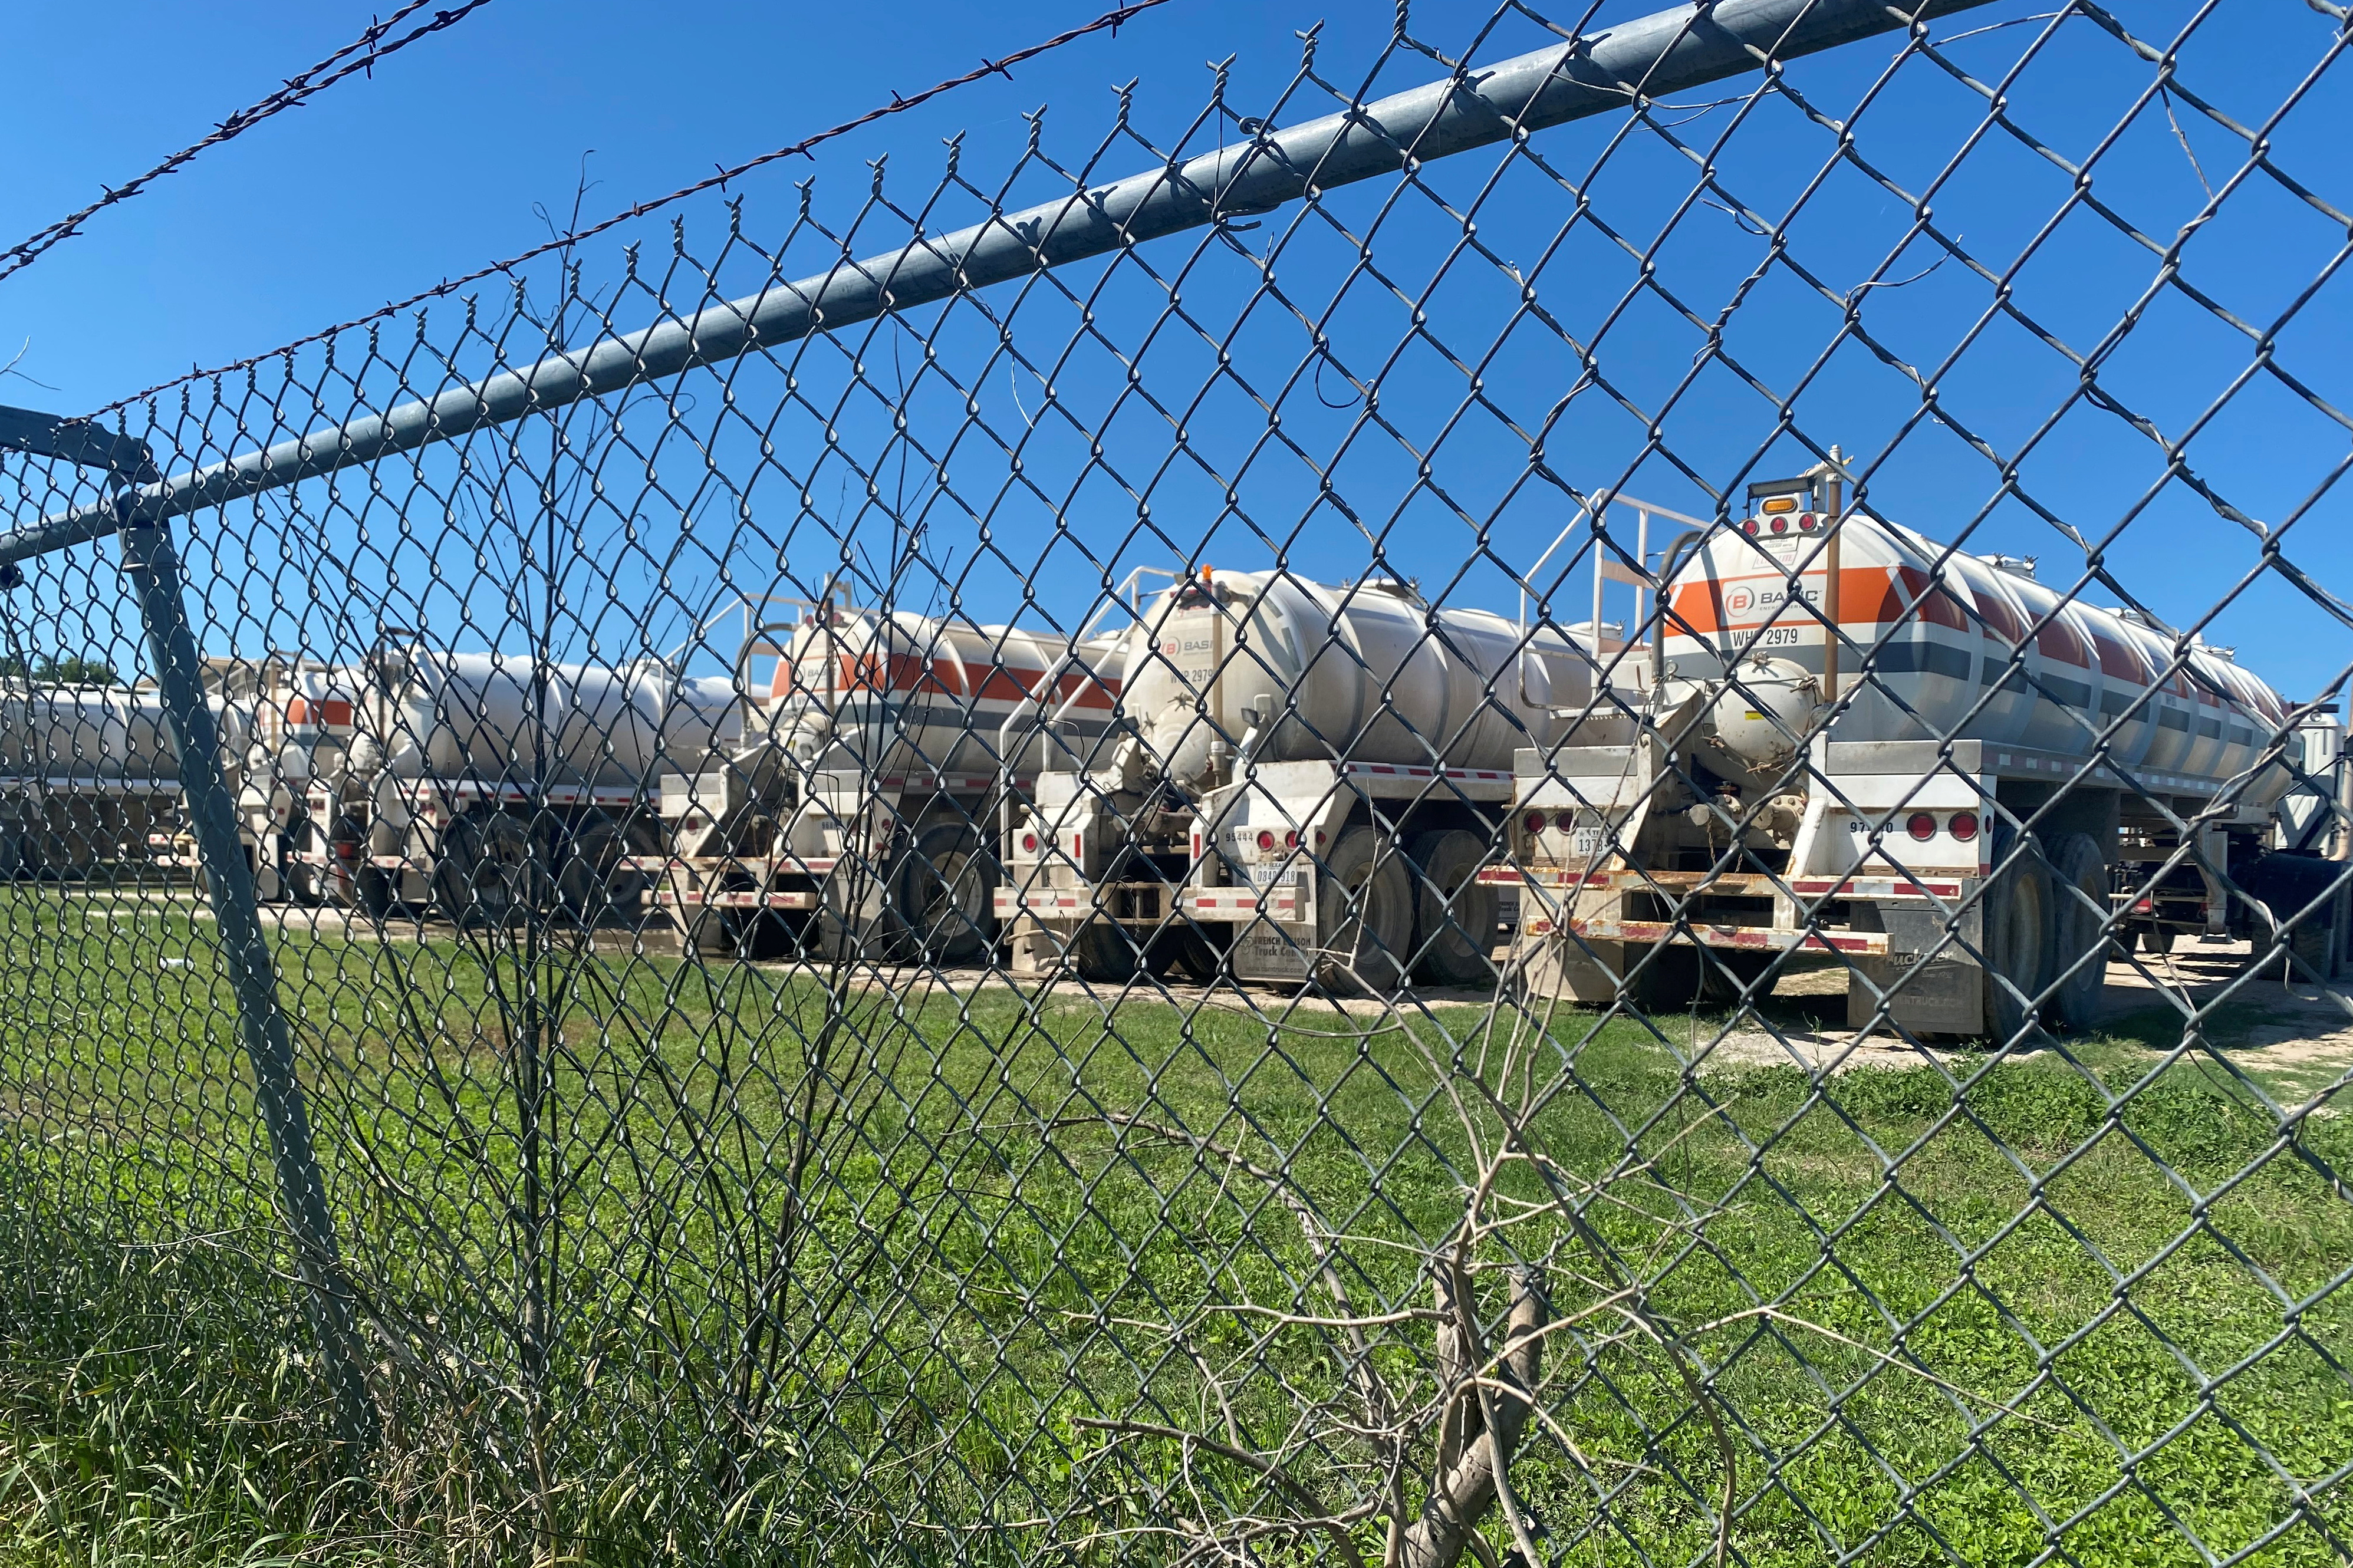 Oilfield equipment is parked at a Basic Energy Services site, as oil and gas activity dips in the Eagle Ford Shale oil field due to the coronavirus disease (COVID-19) pandemic and the drop in demand for oil globally, in Karnes County, Texas, U.S., May 18, 2020. Picture taken May 18, 2020. REUTERS/Jennifer Hiller/File Photo